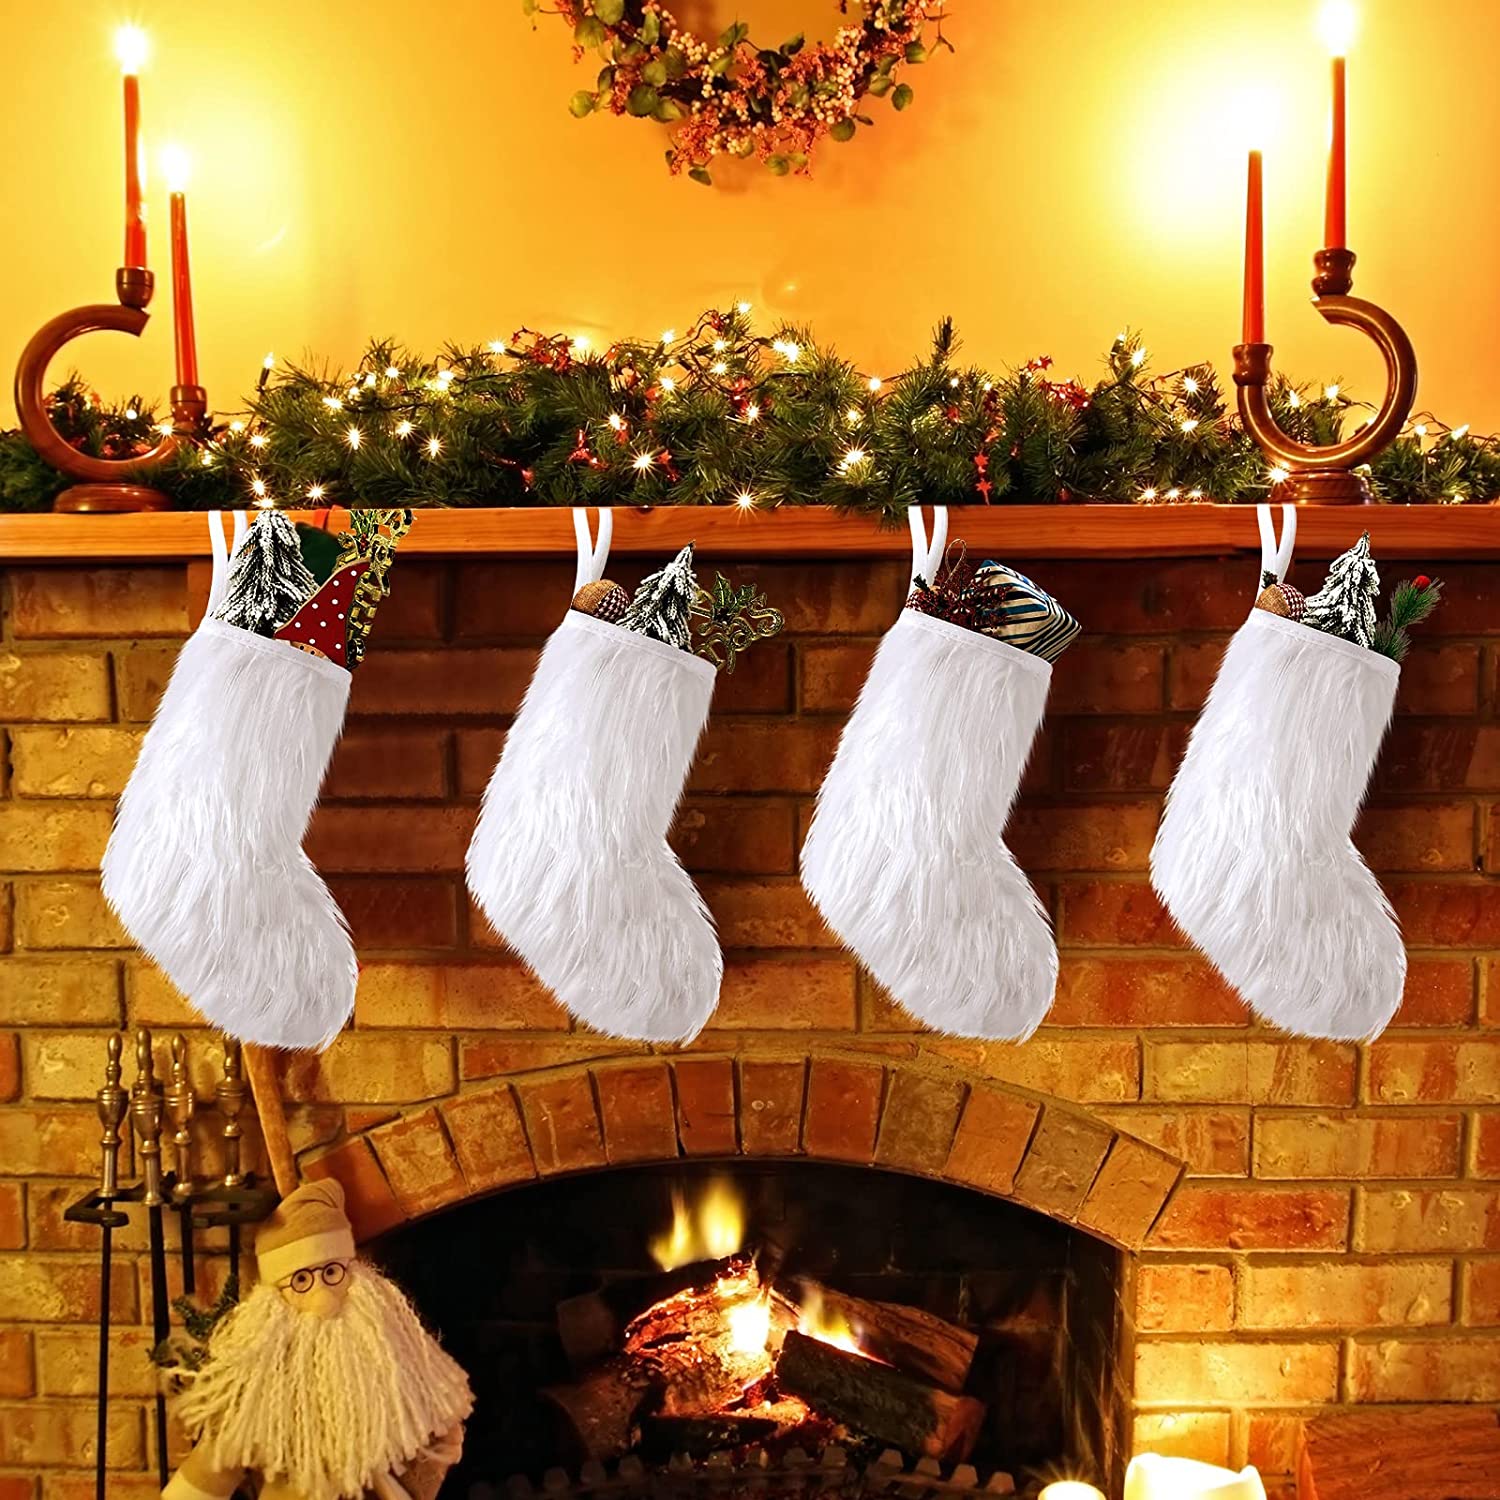 12 Pcs 10 Inch Snowy White Christmas Stockings Faux Fur Christmas Stockings Furry Christmas Stocking Hanging Ornaments Candy Gift Bags Fireplace Hanging Stocking for Decorations Xmas Tree